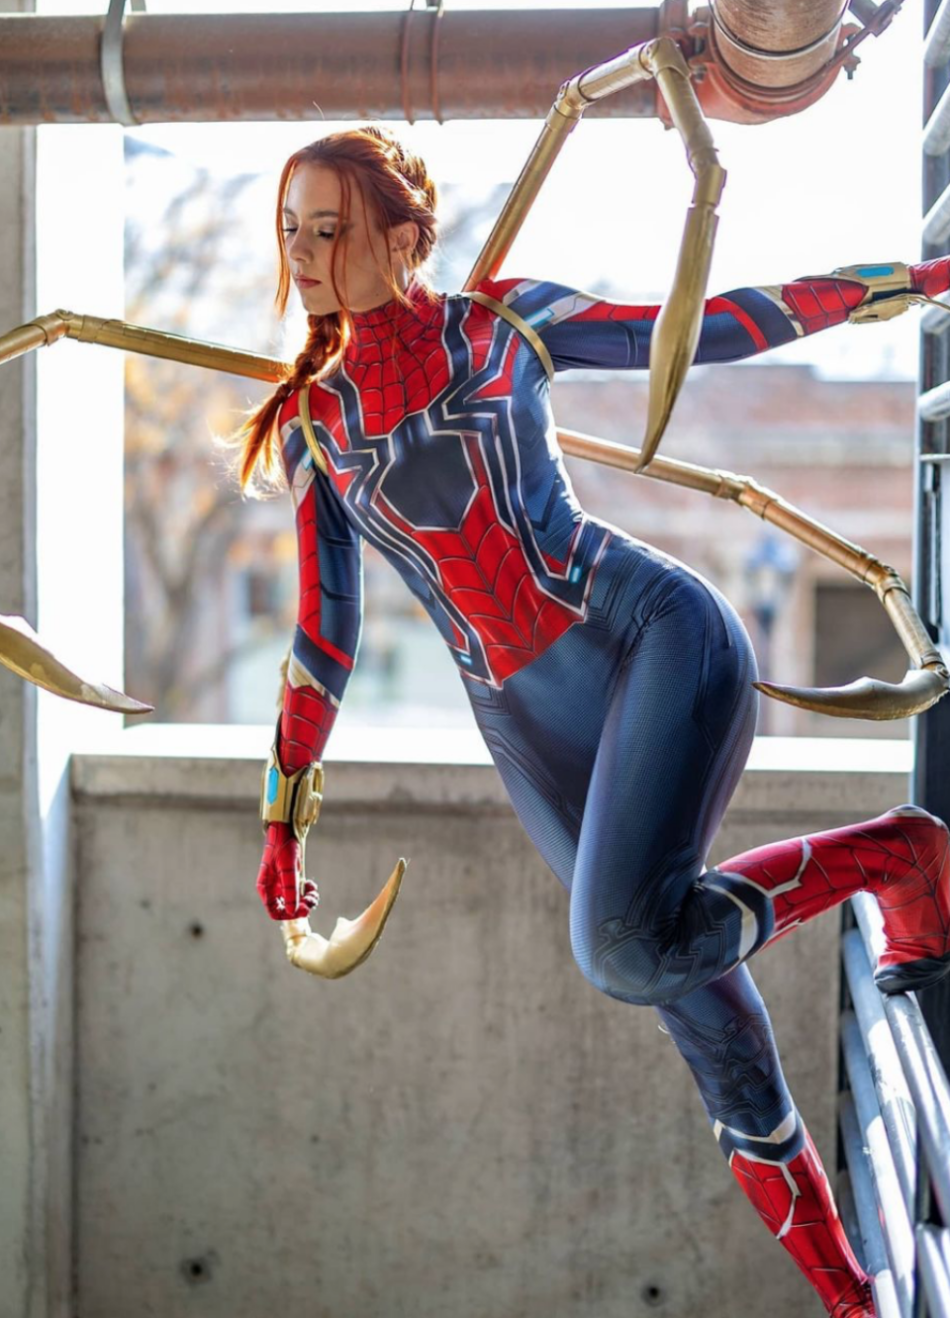 Sexy Red Hot Cosplay Girls Spiderman Women Best Photo Compilation 2021 (89 HQ Photos) 147